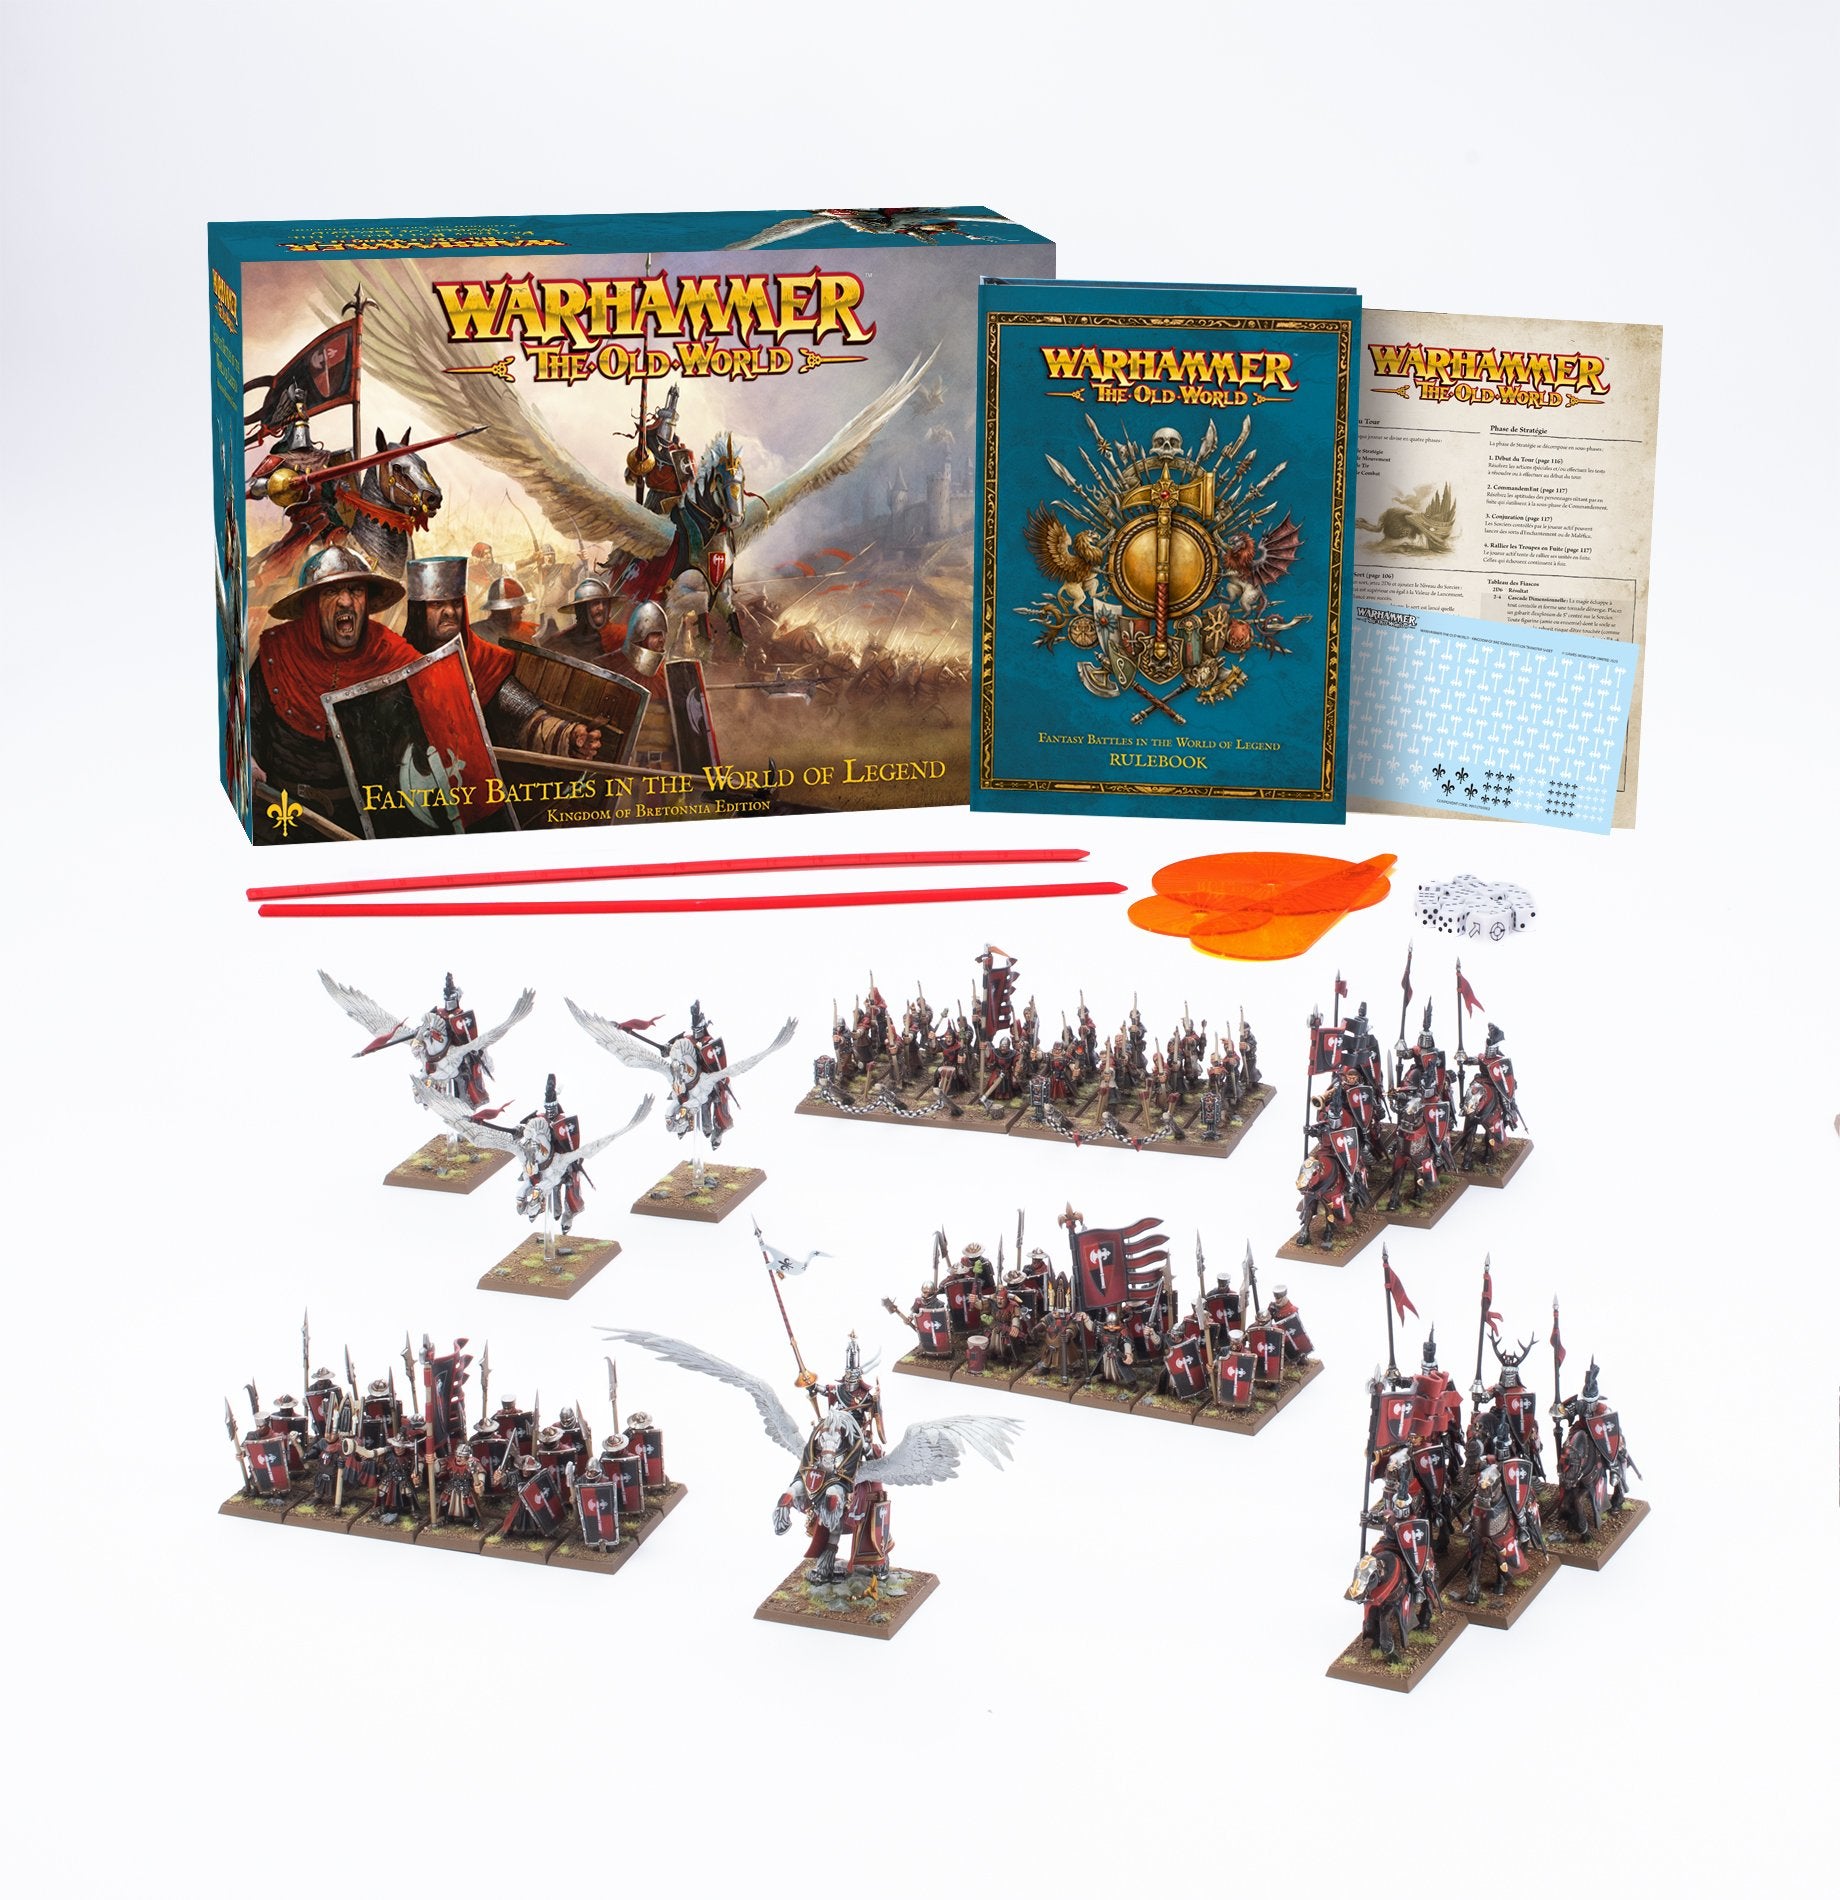 Warhammer: The Old World - Kingdom Of Bretonnia - Release Date 20/1/24 - Loaded Dice Barry Vale of Glamorgan CF64 3HD